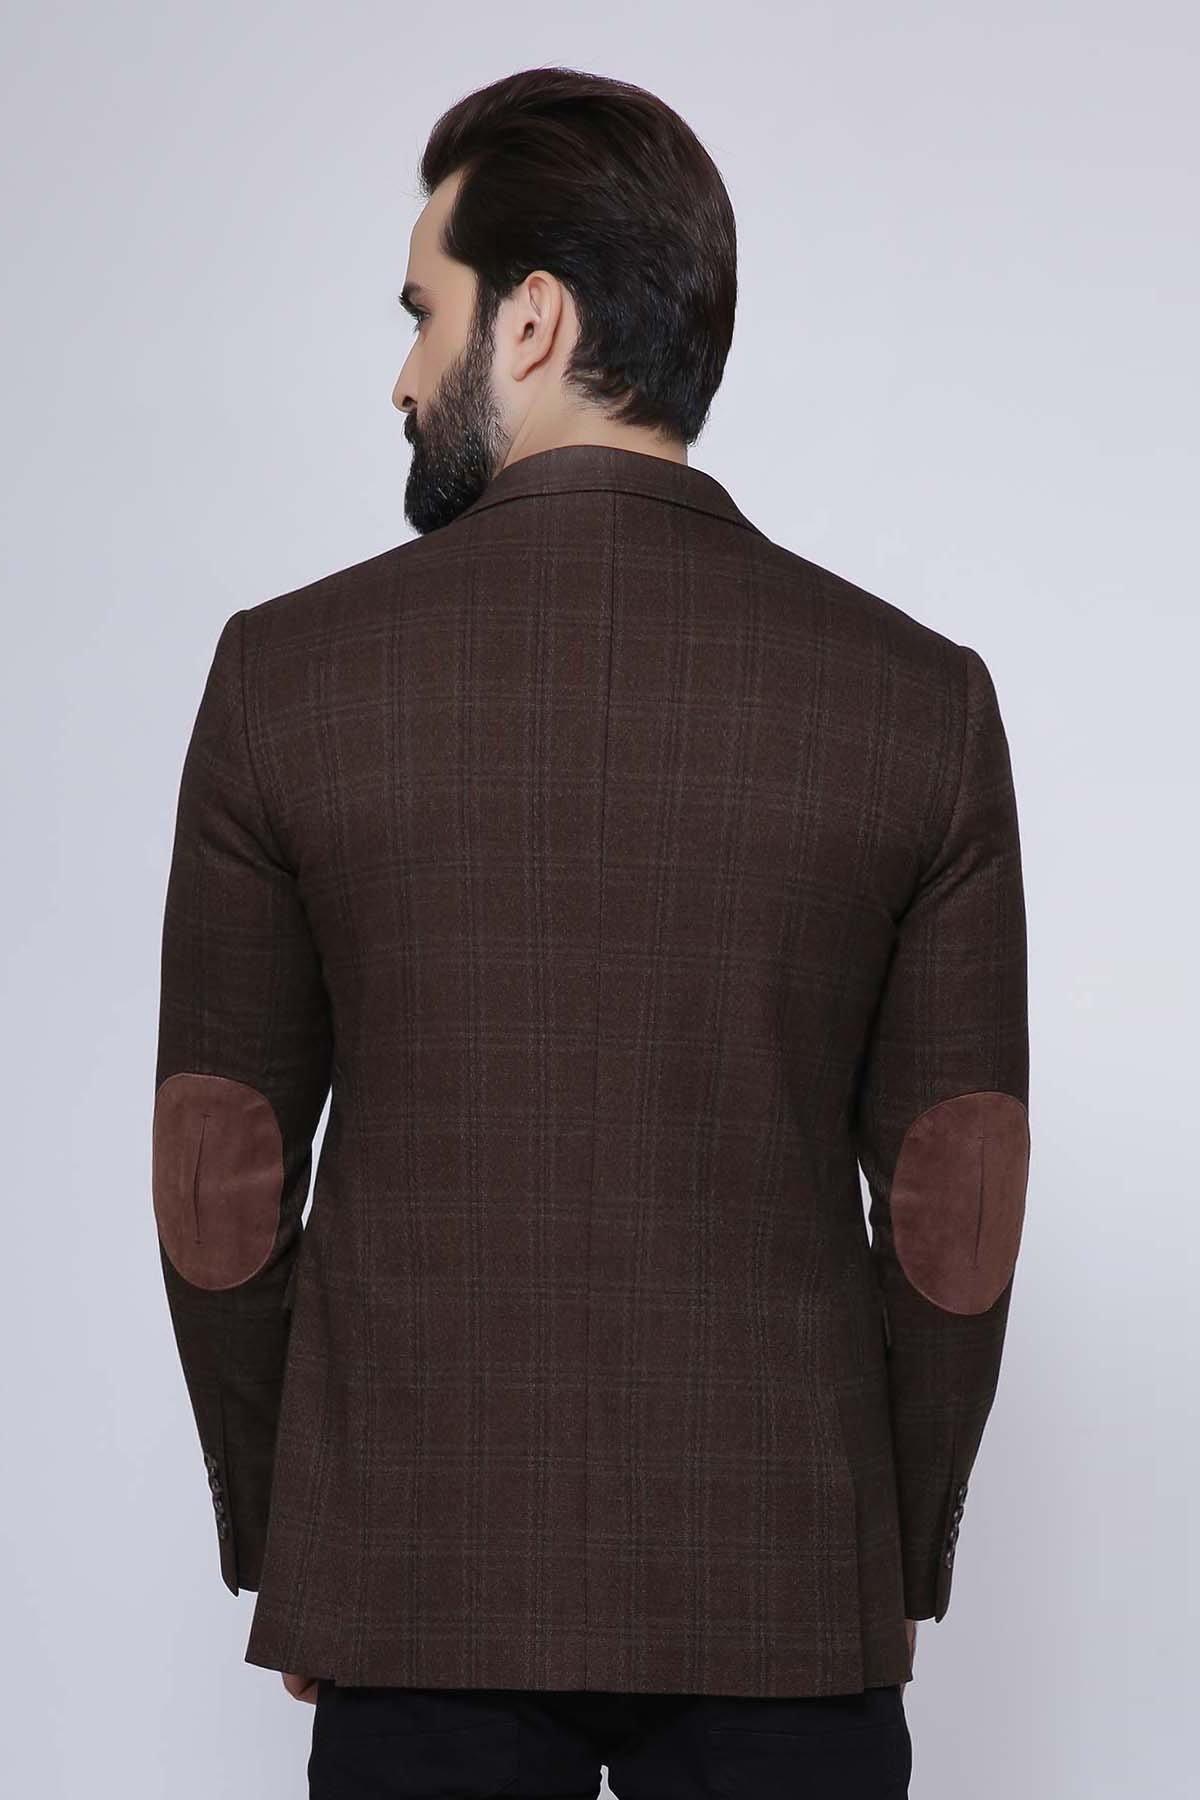 CASUAL COAT 2 BUTTON SMART FIT BROWN at Charcoal Clothing